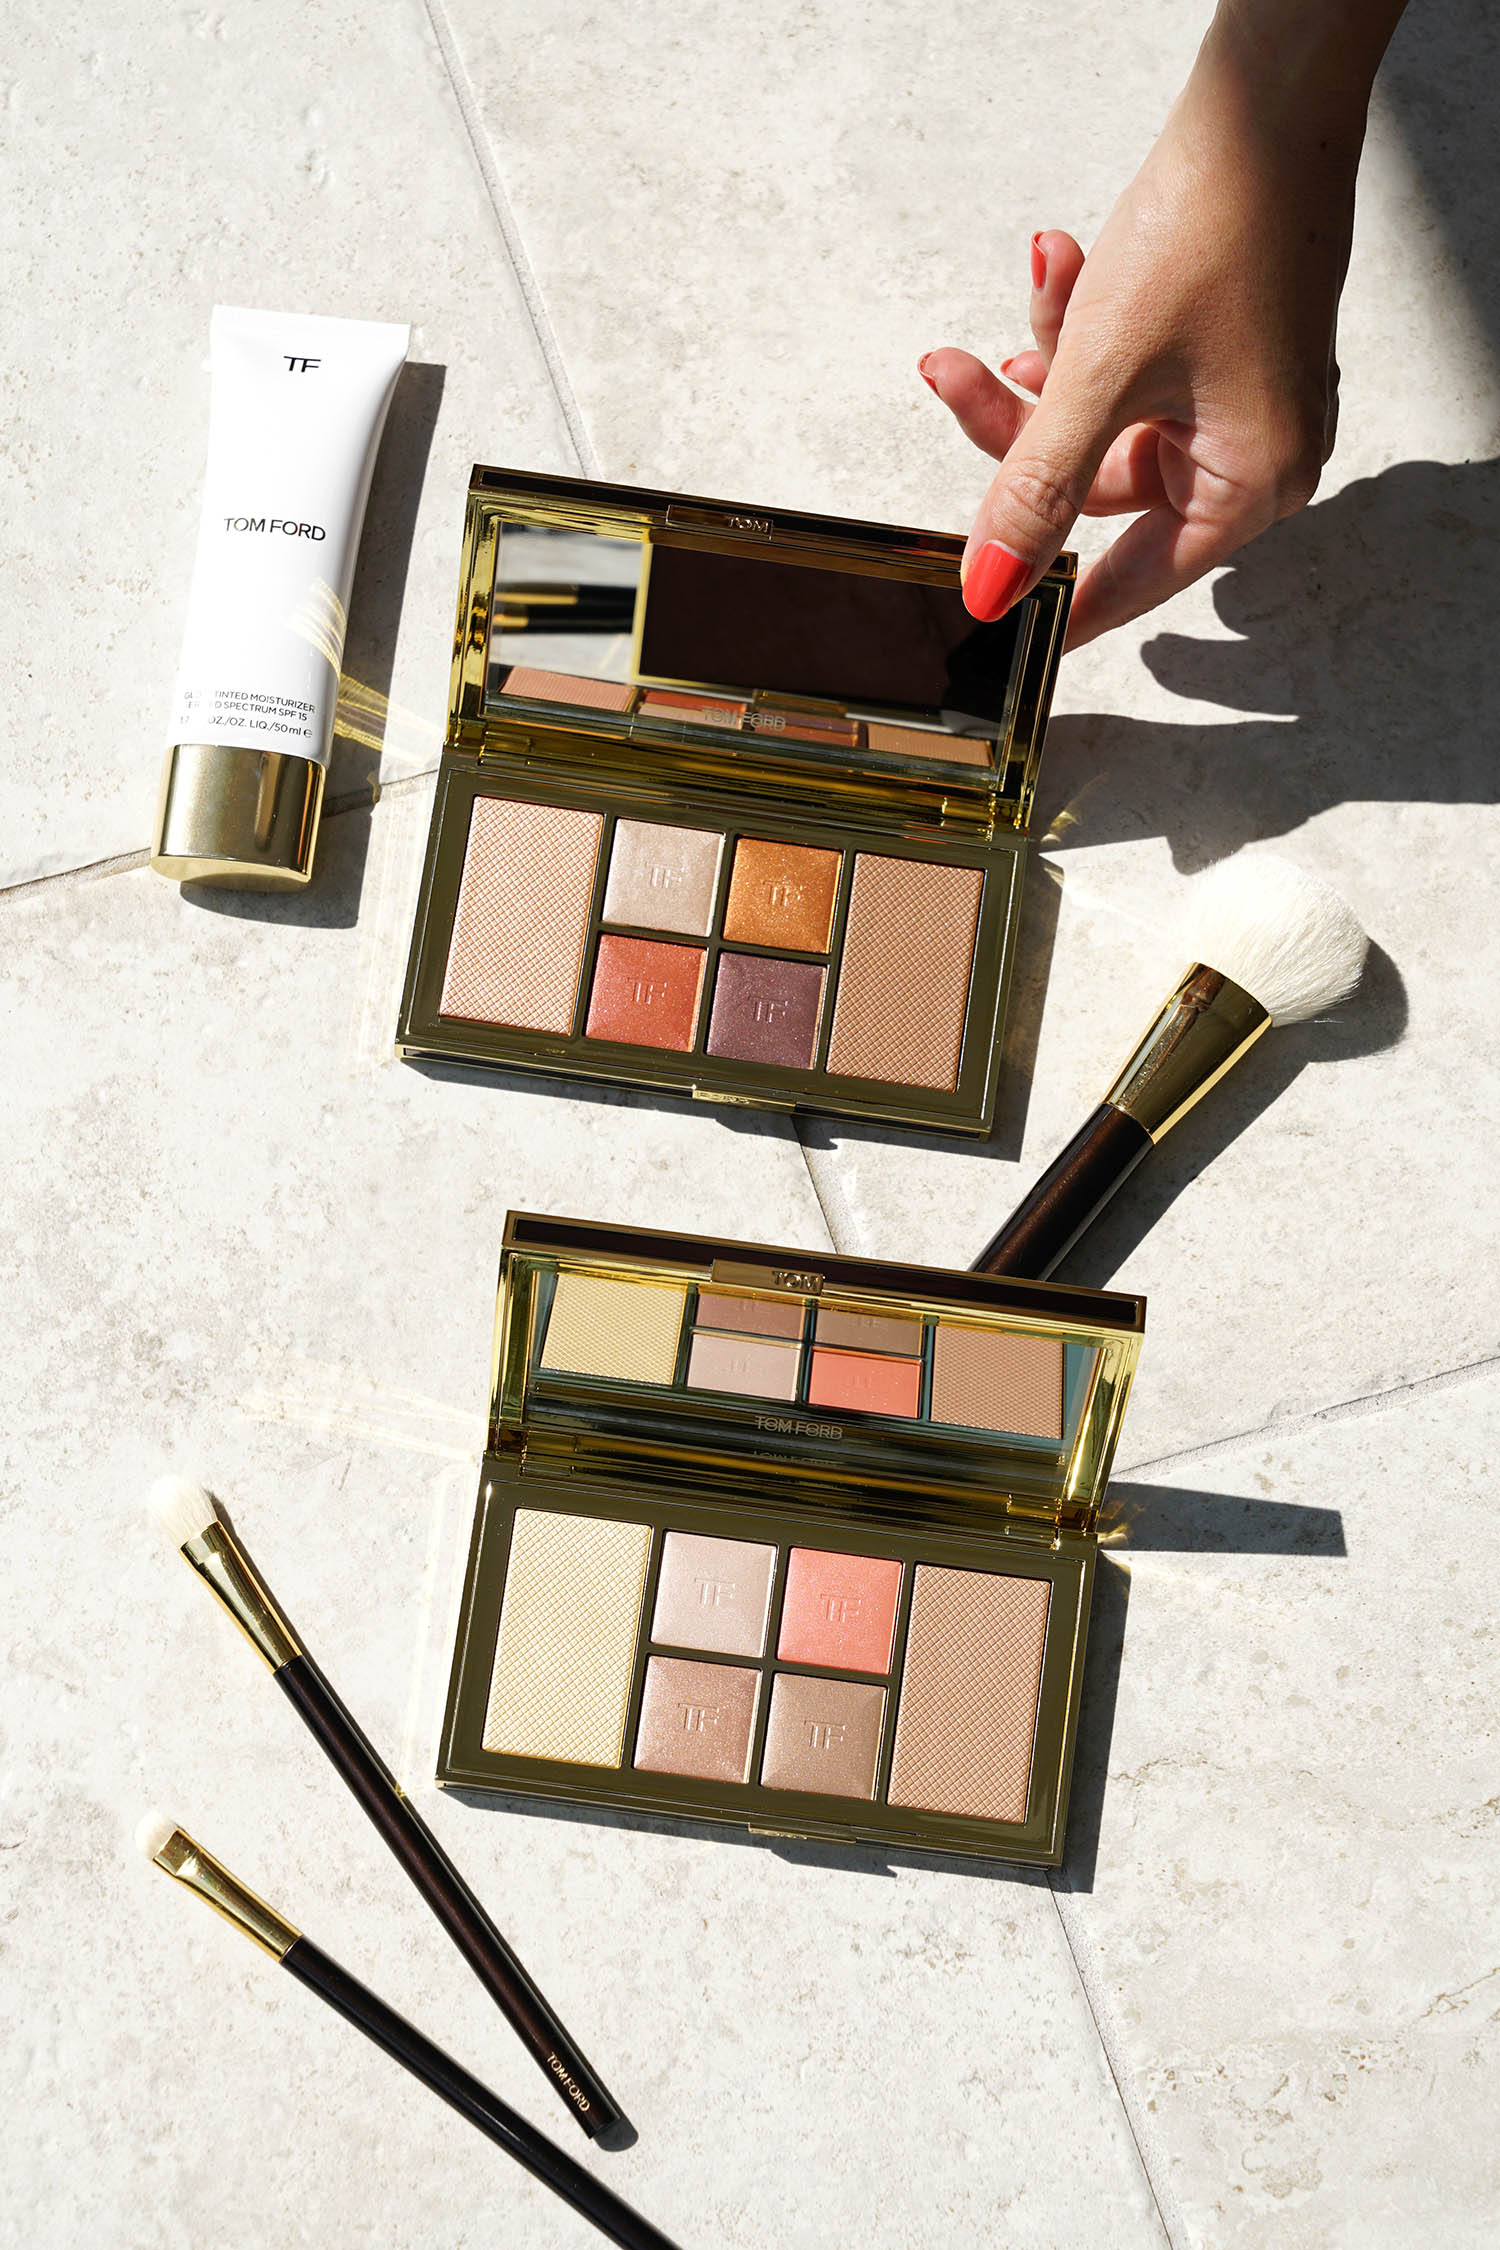 Tom Ford Beauty Archives - Page 2 of 30 - The Beauty Look Book